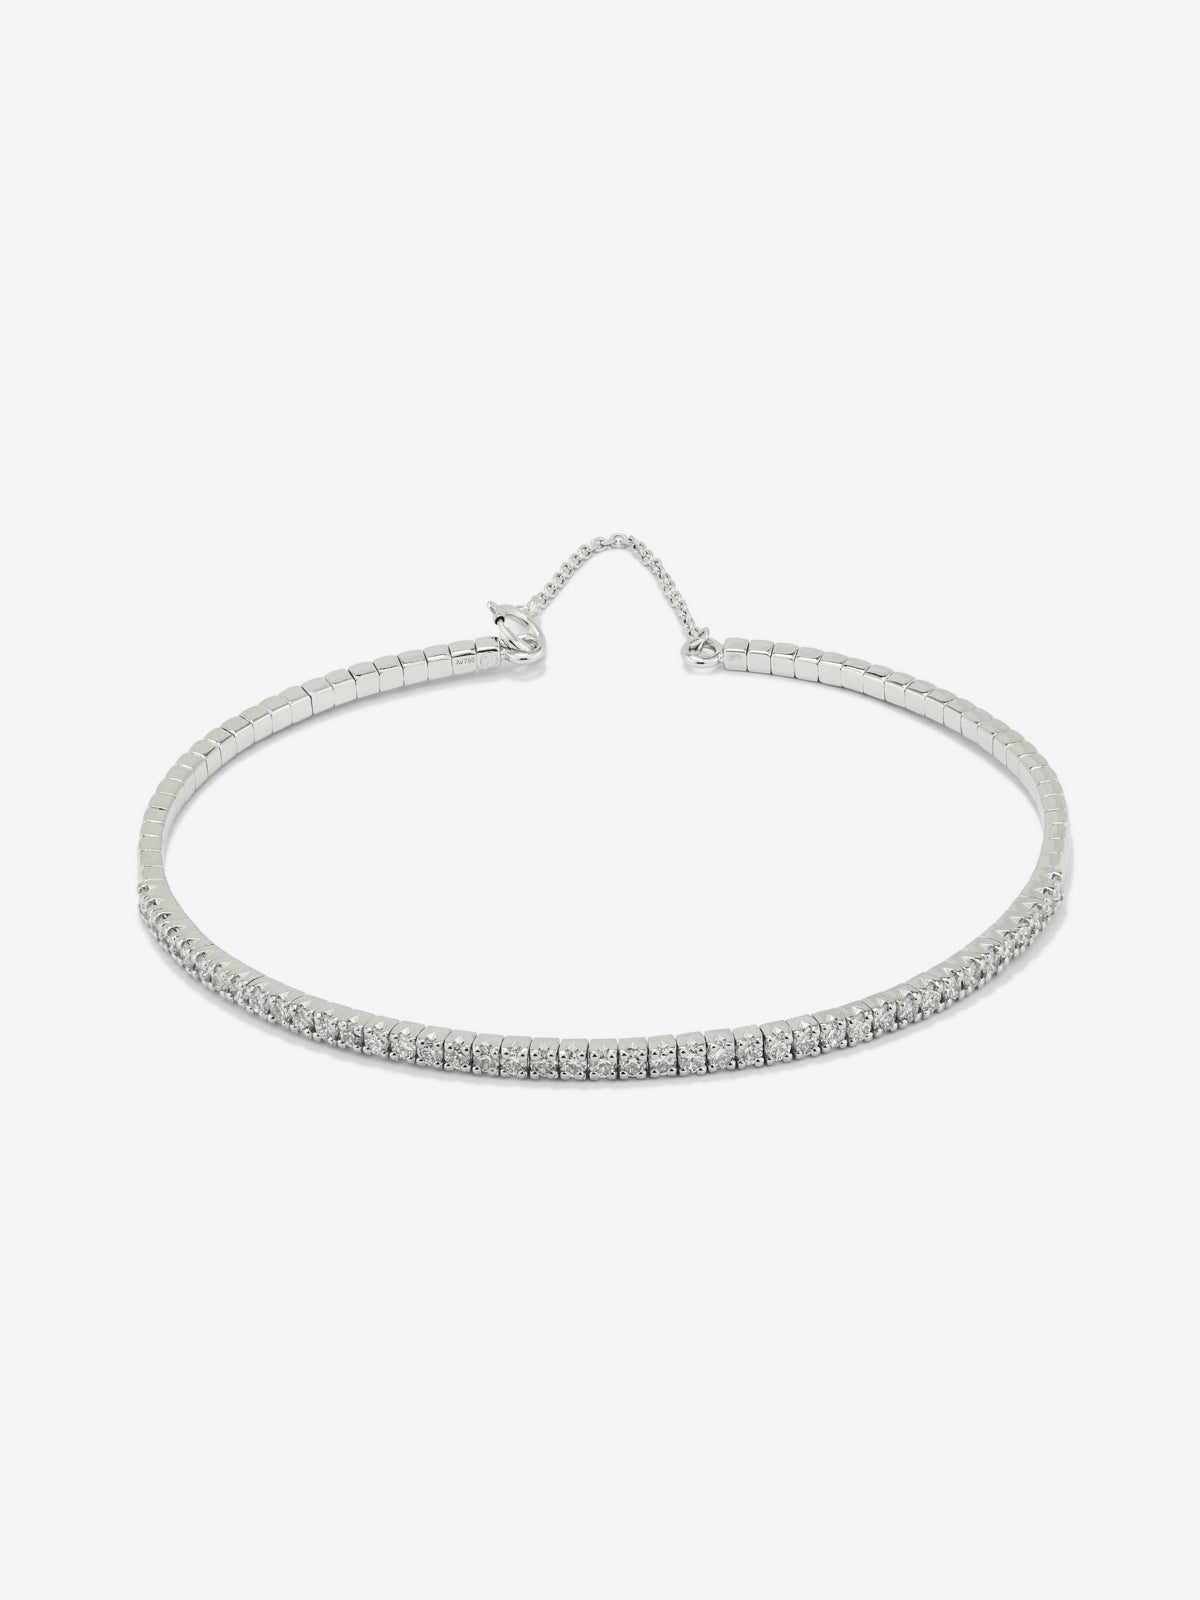 Rigid 18K white gold bracelet with 42 brilliant-cut diamonds with a total of 0.71 cts